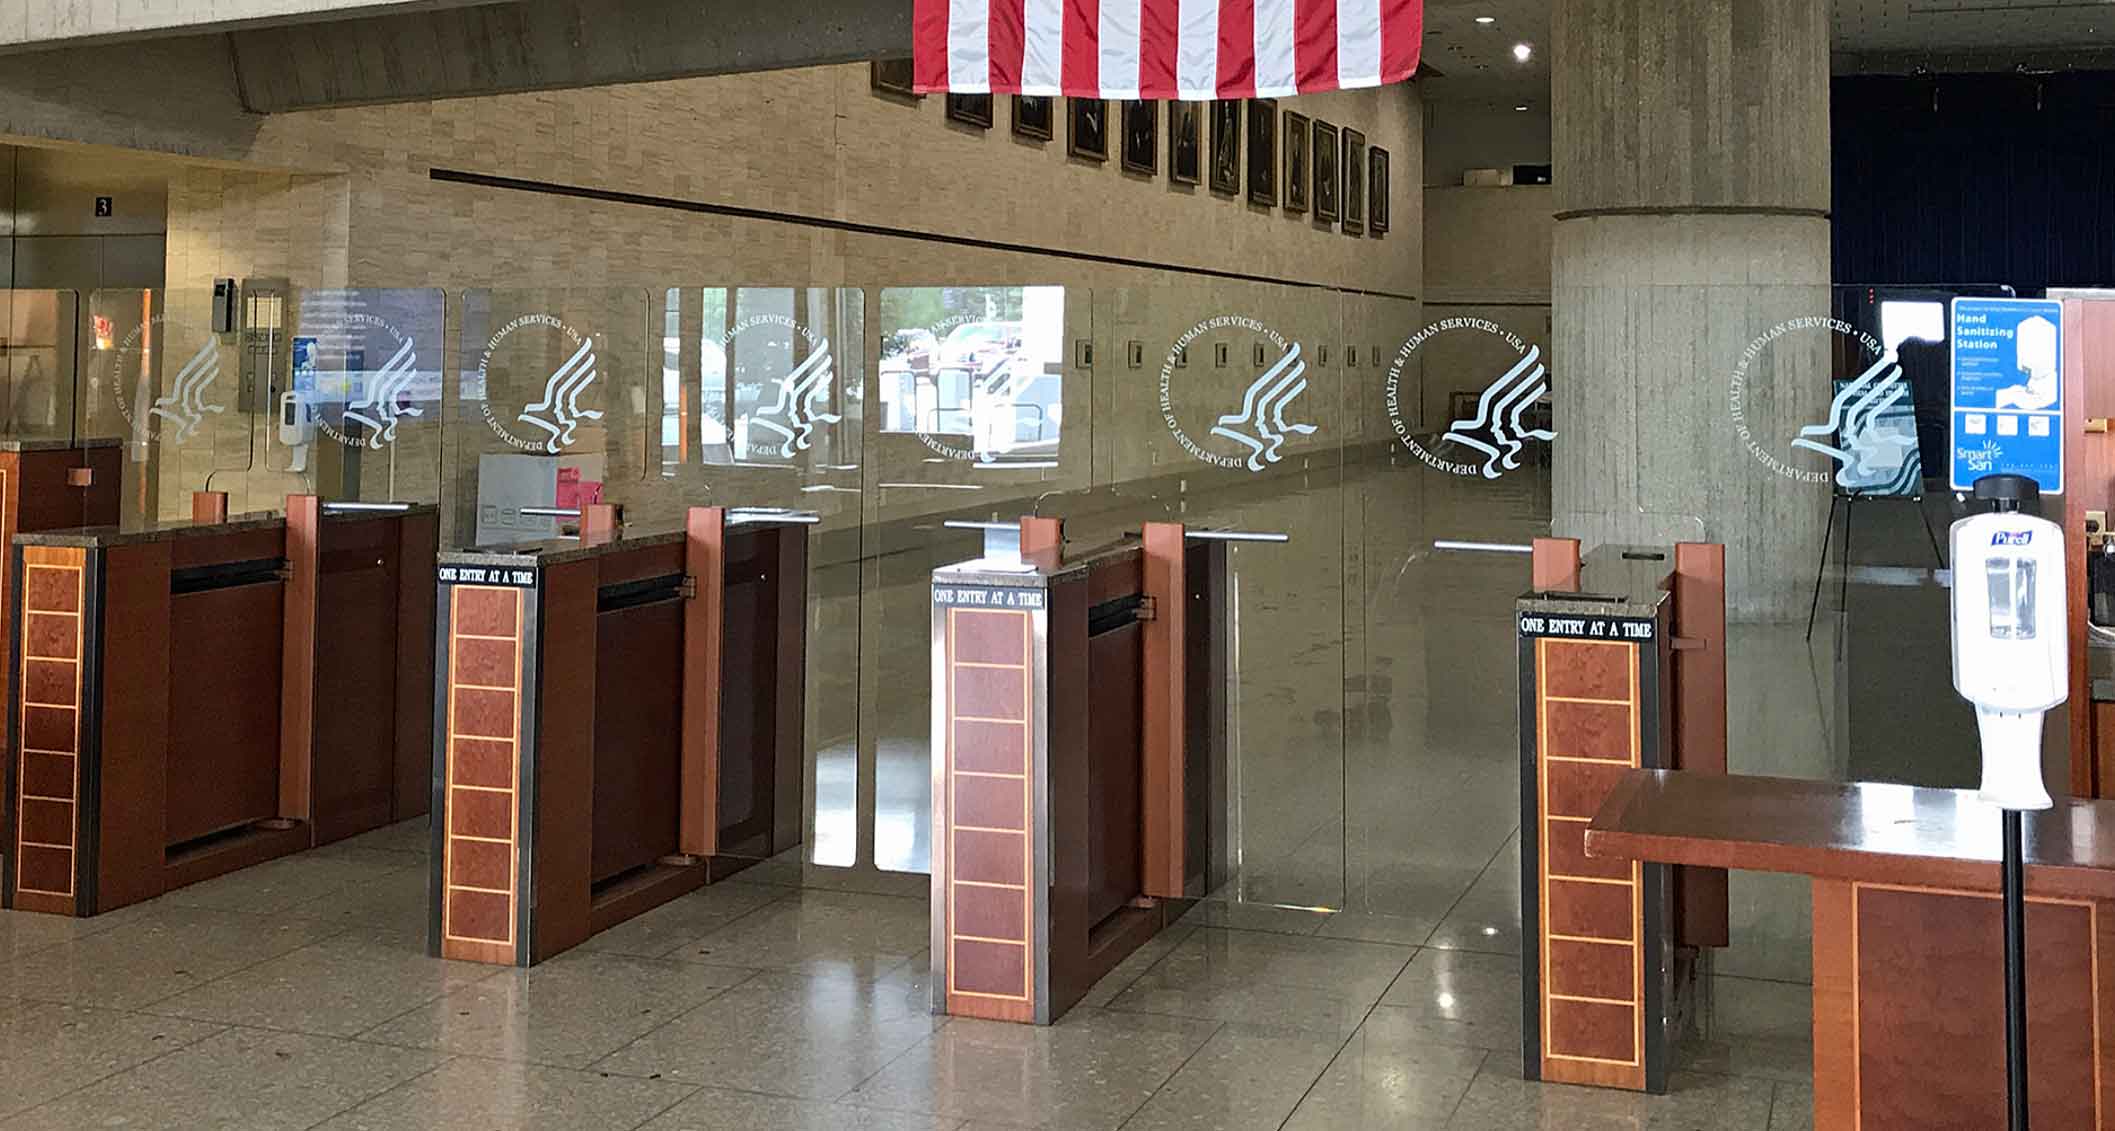 Aeroturn’s first rotary and linear turnstiles were installed in 2004, and it has built a high-profile  customer list that includes the White House, Uniformed Division of the U.S. Secret Service, the U.S. Treasury Department, Harvard University Library System and the renovation of the Baker Library, which was built in the 1800s.